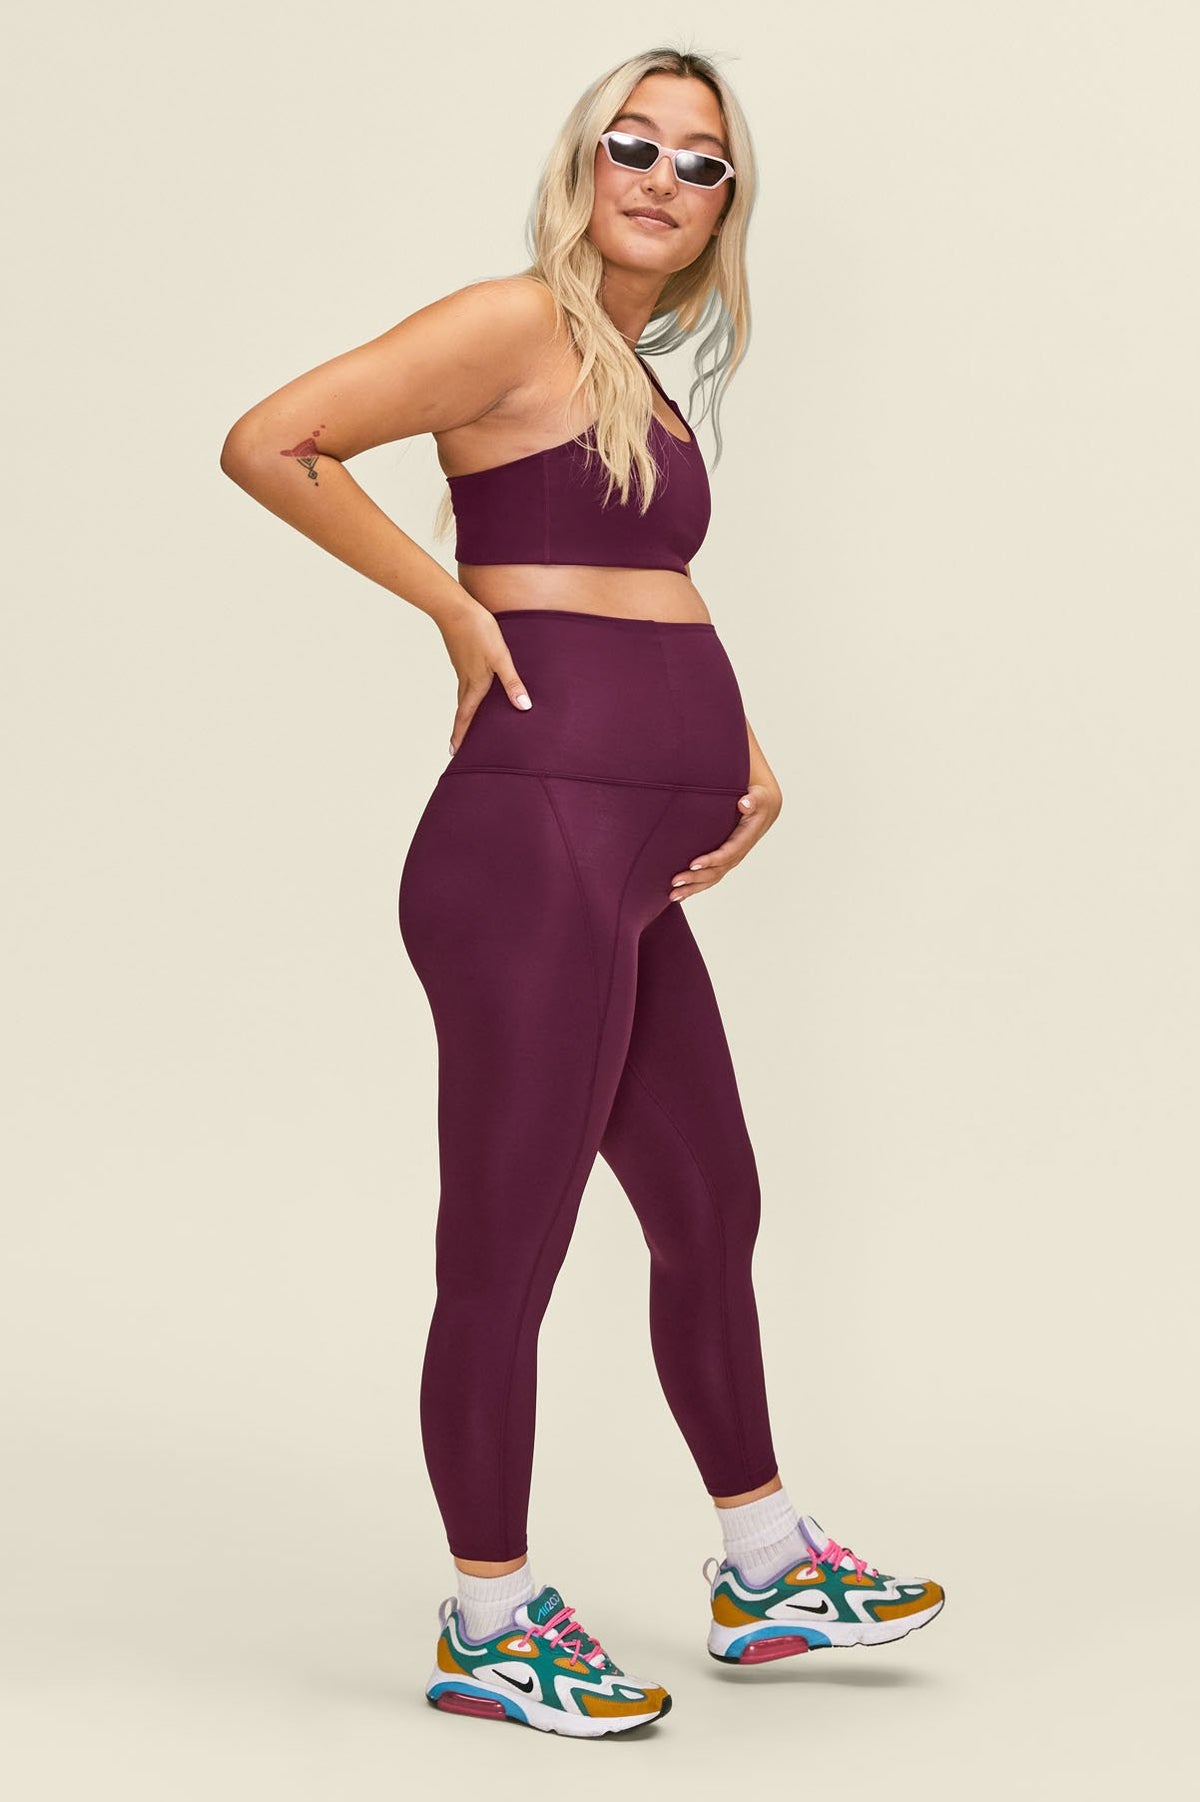 Girlfriend Collective Black Friday 2020 Sale - 50 Percent Off Leggings